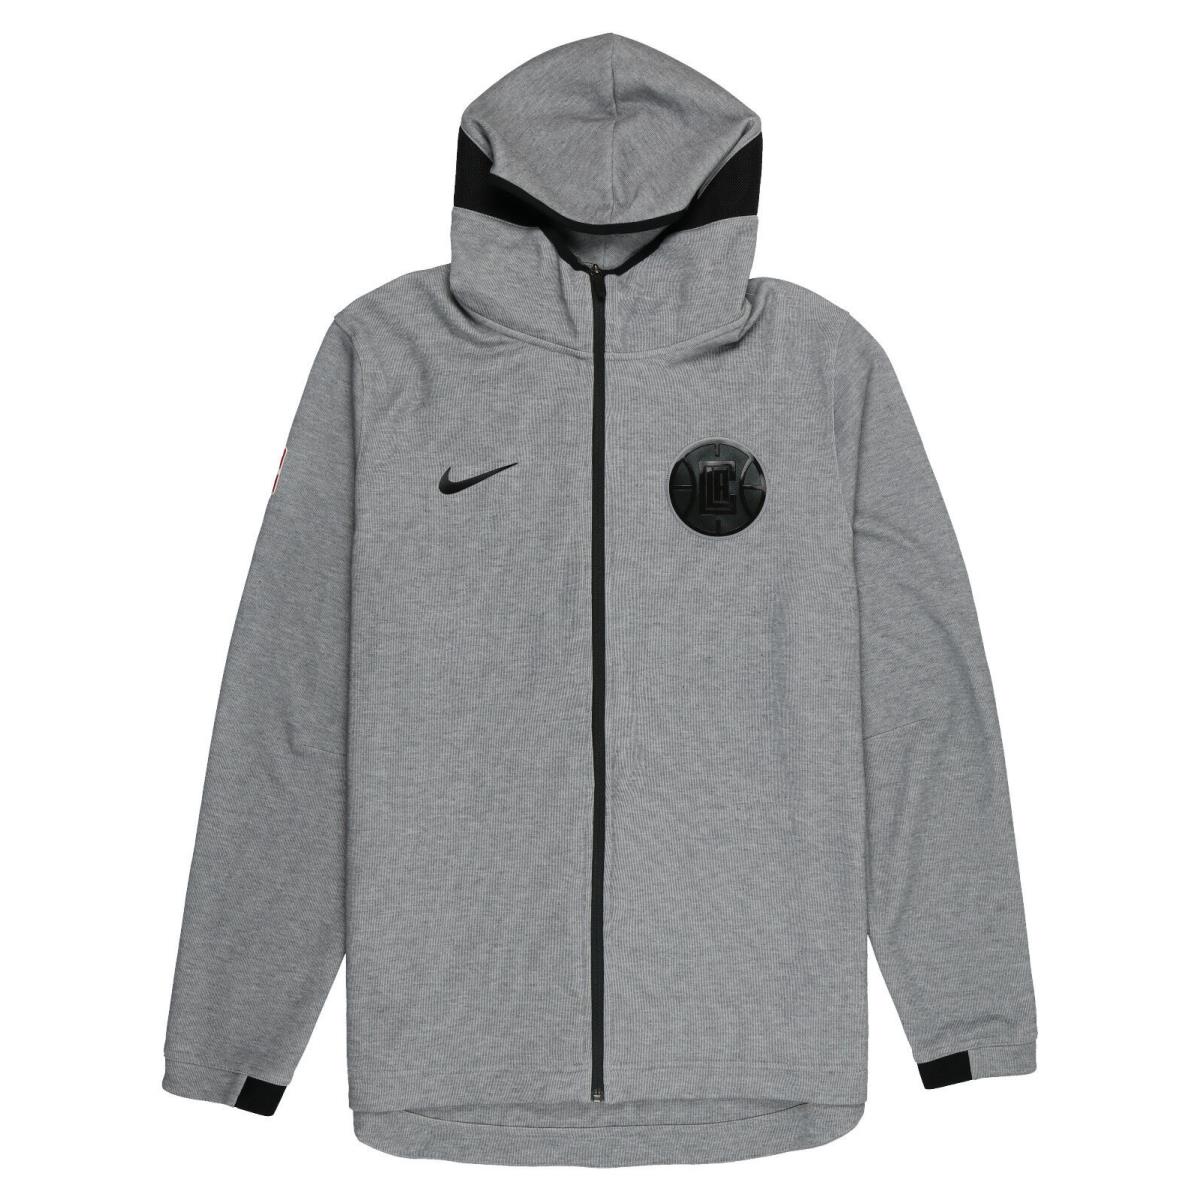 Nike Los Angeles Clippers Showtime Full Zip Hoodie Xx-large Gray Black Jacket